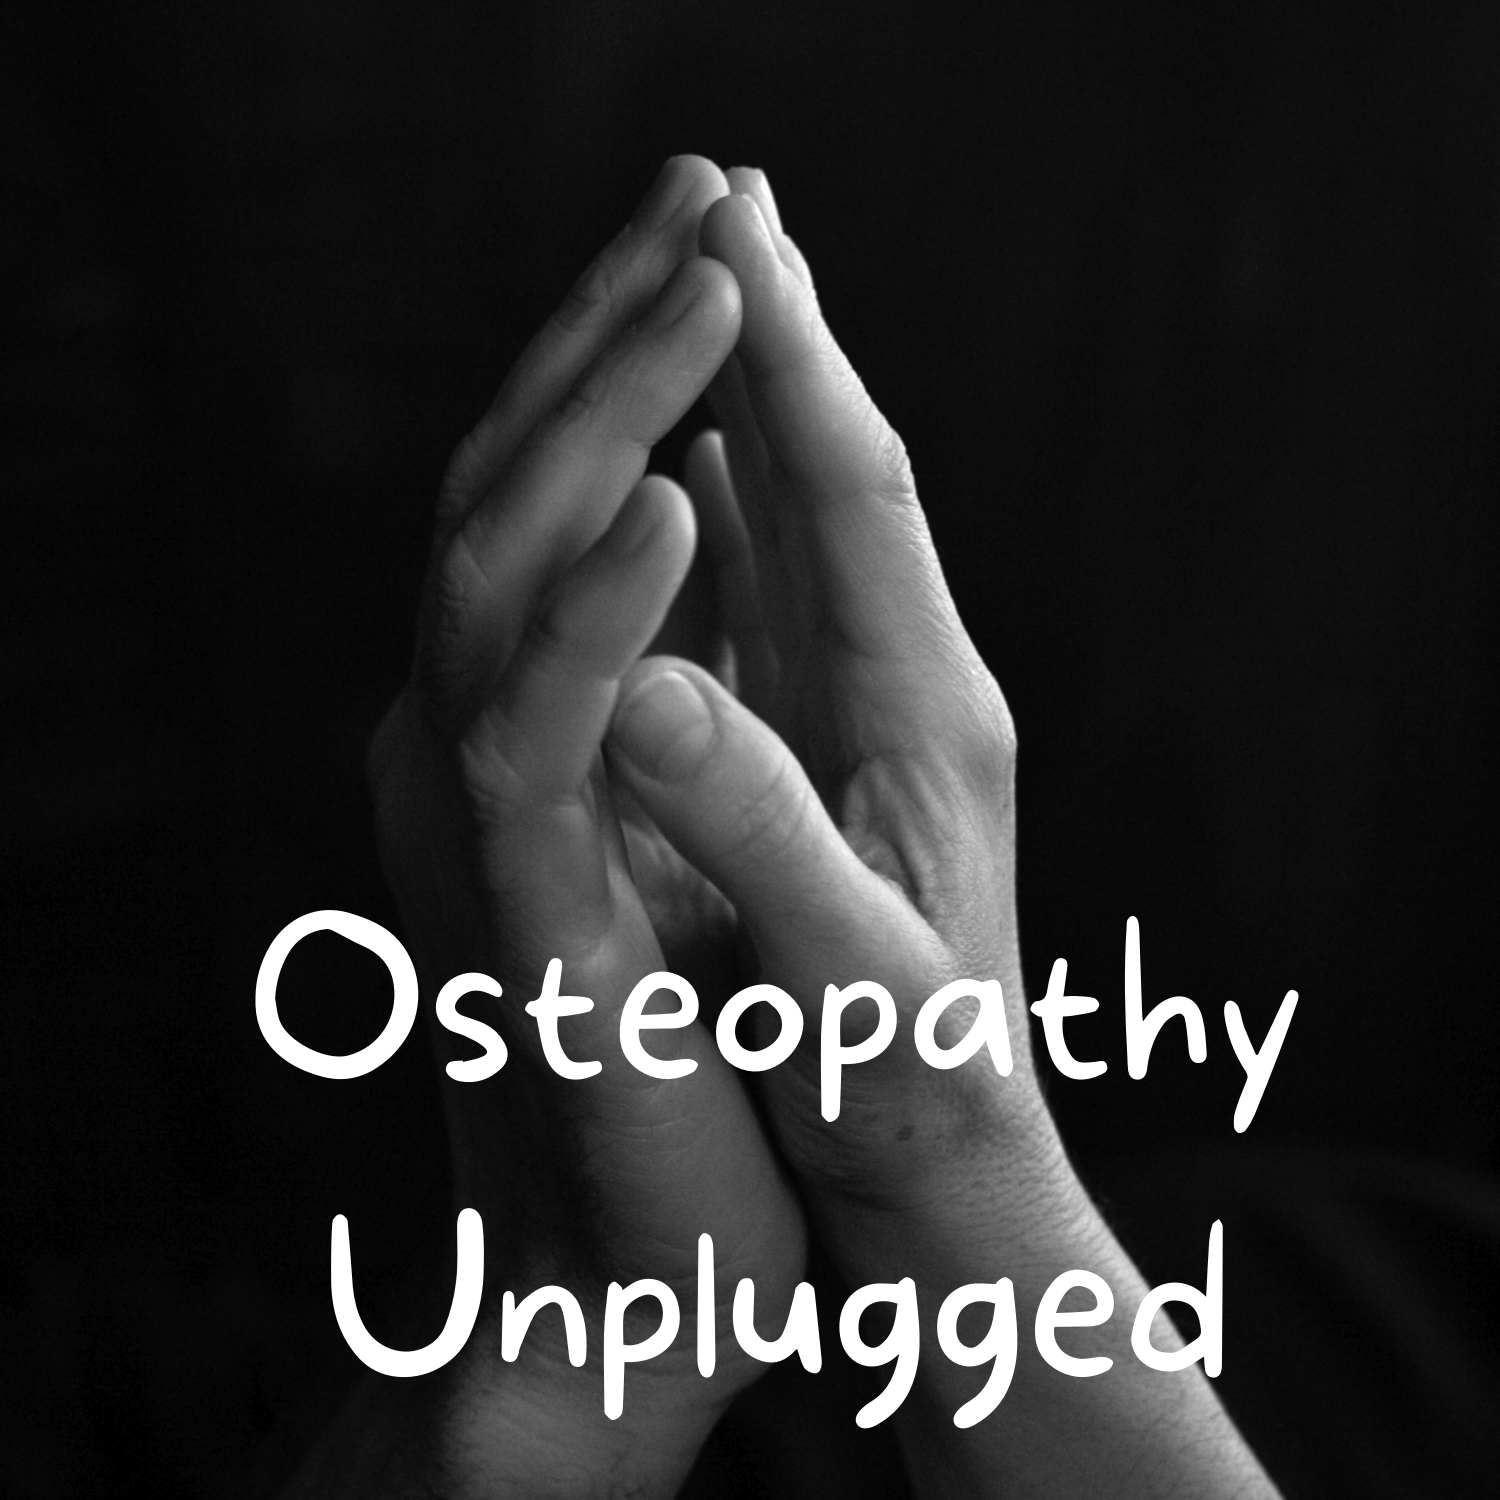 Episode 2 - What is Osteopathy? Introduction